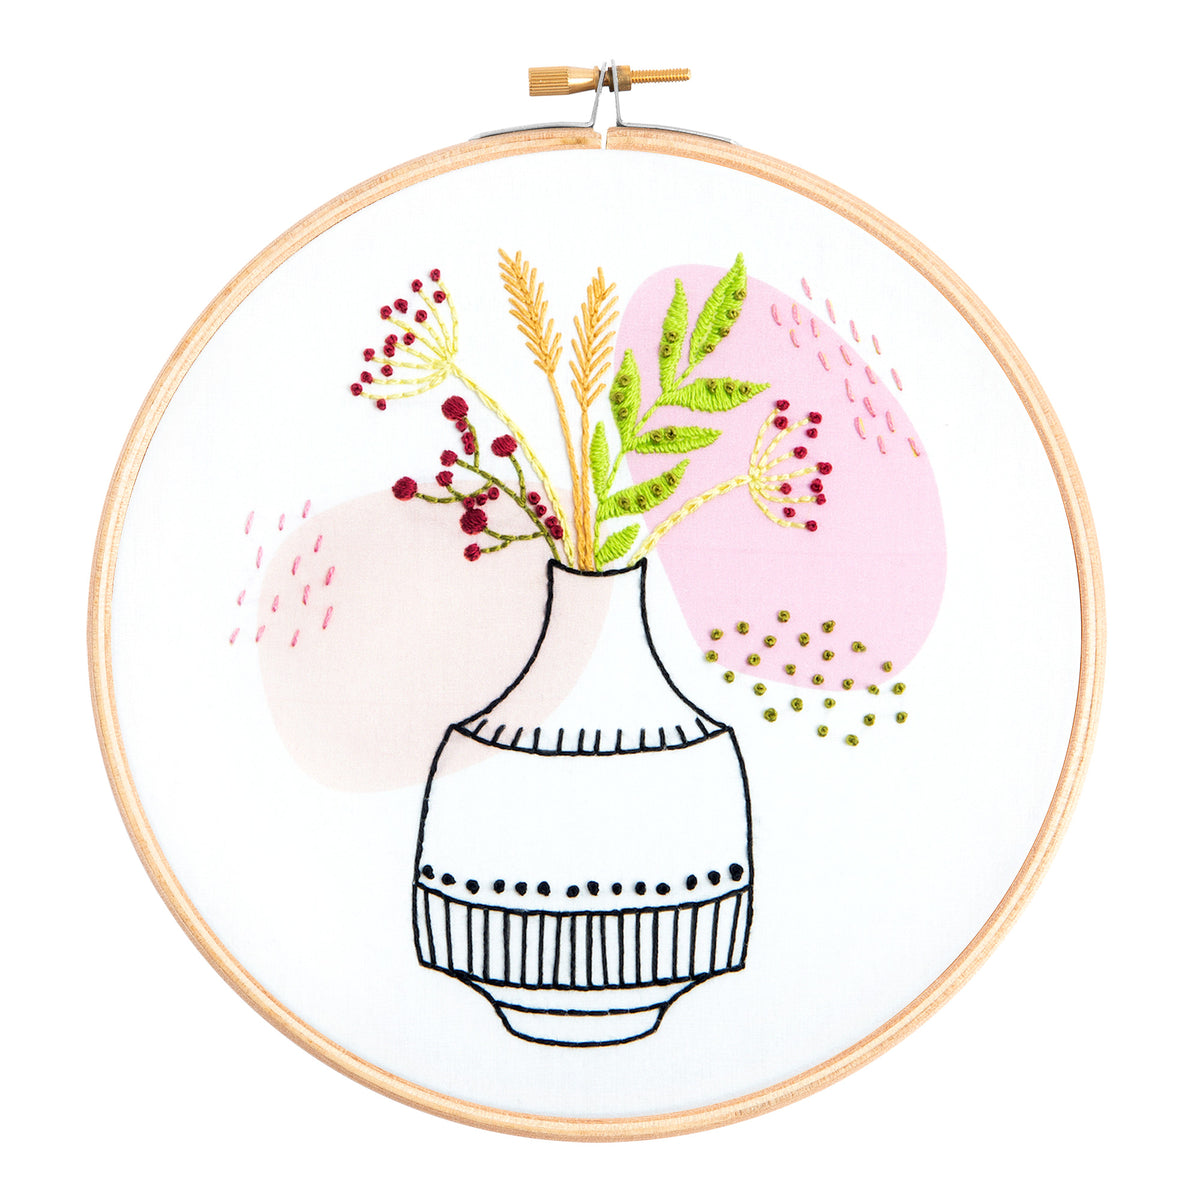 Meadow Stroll Hand Embroidery Kit